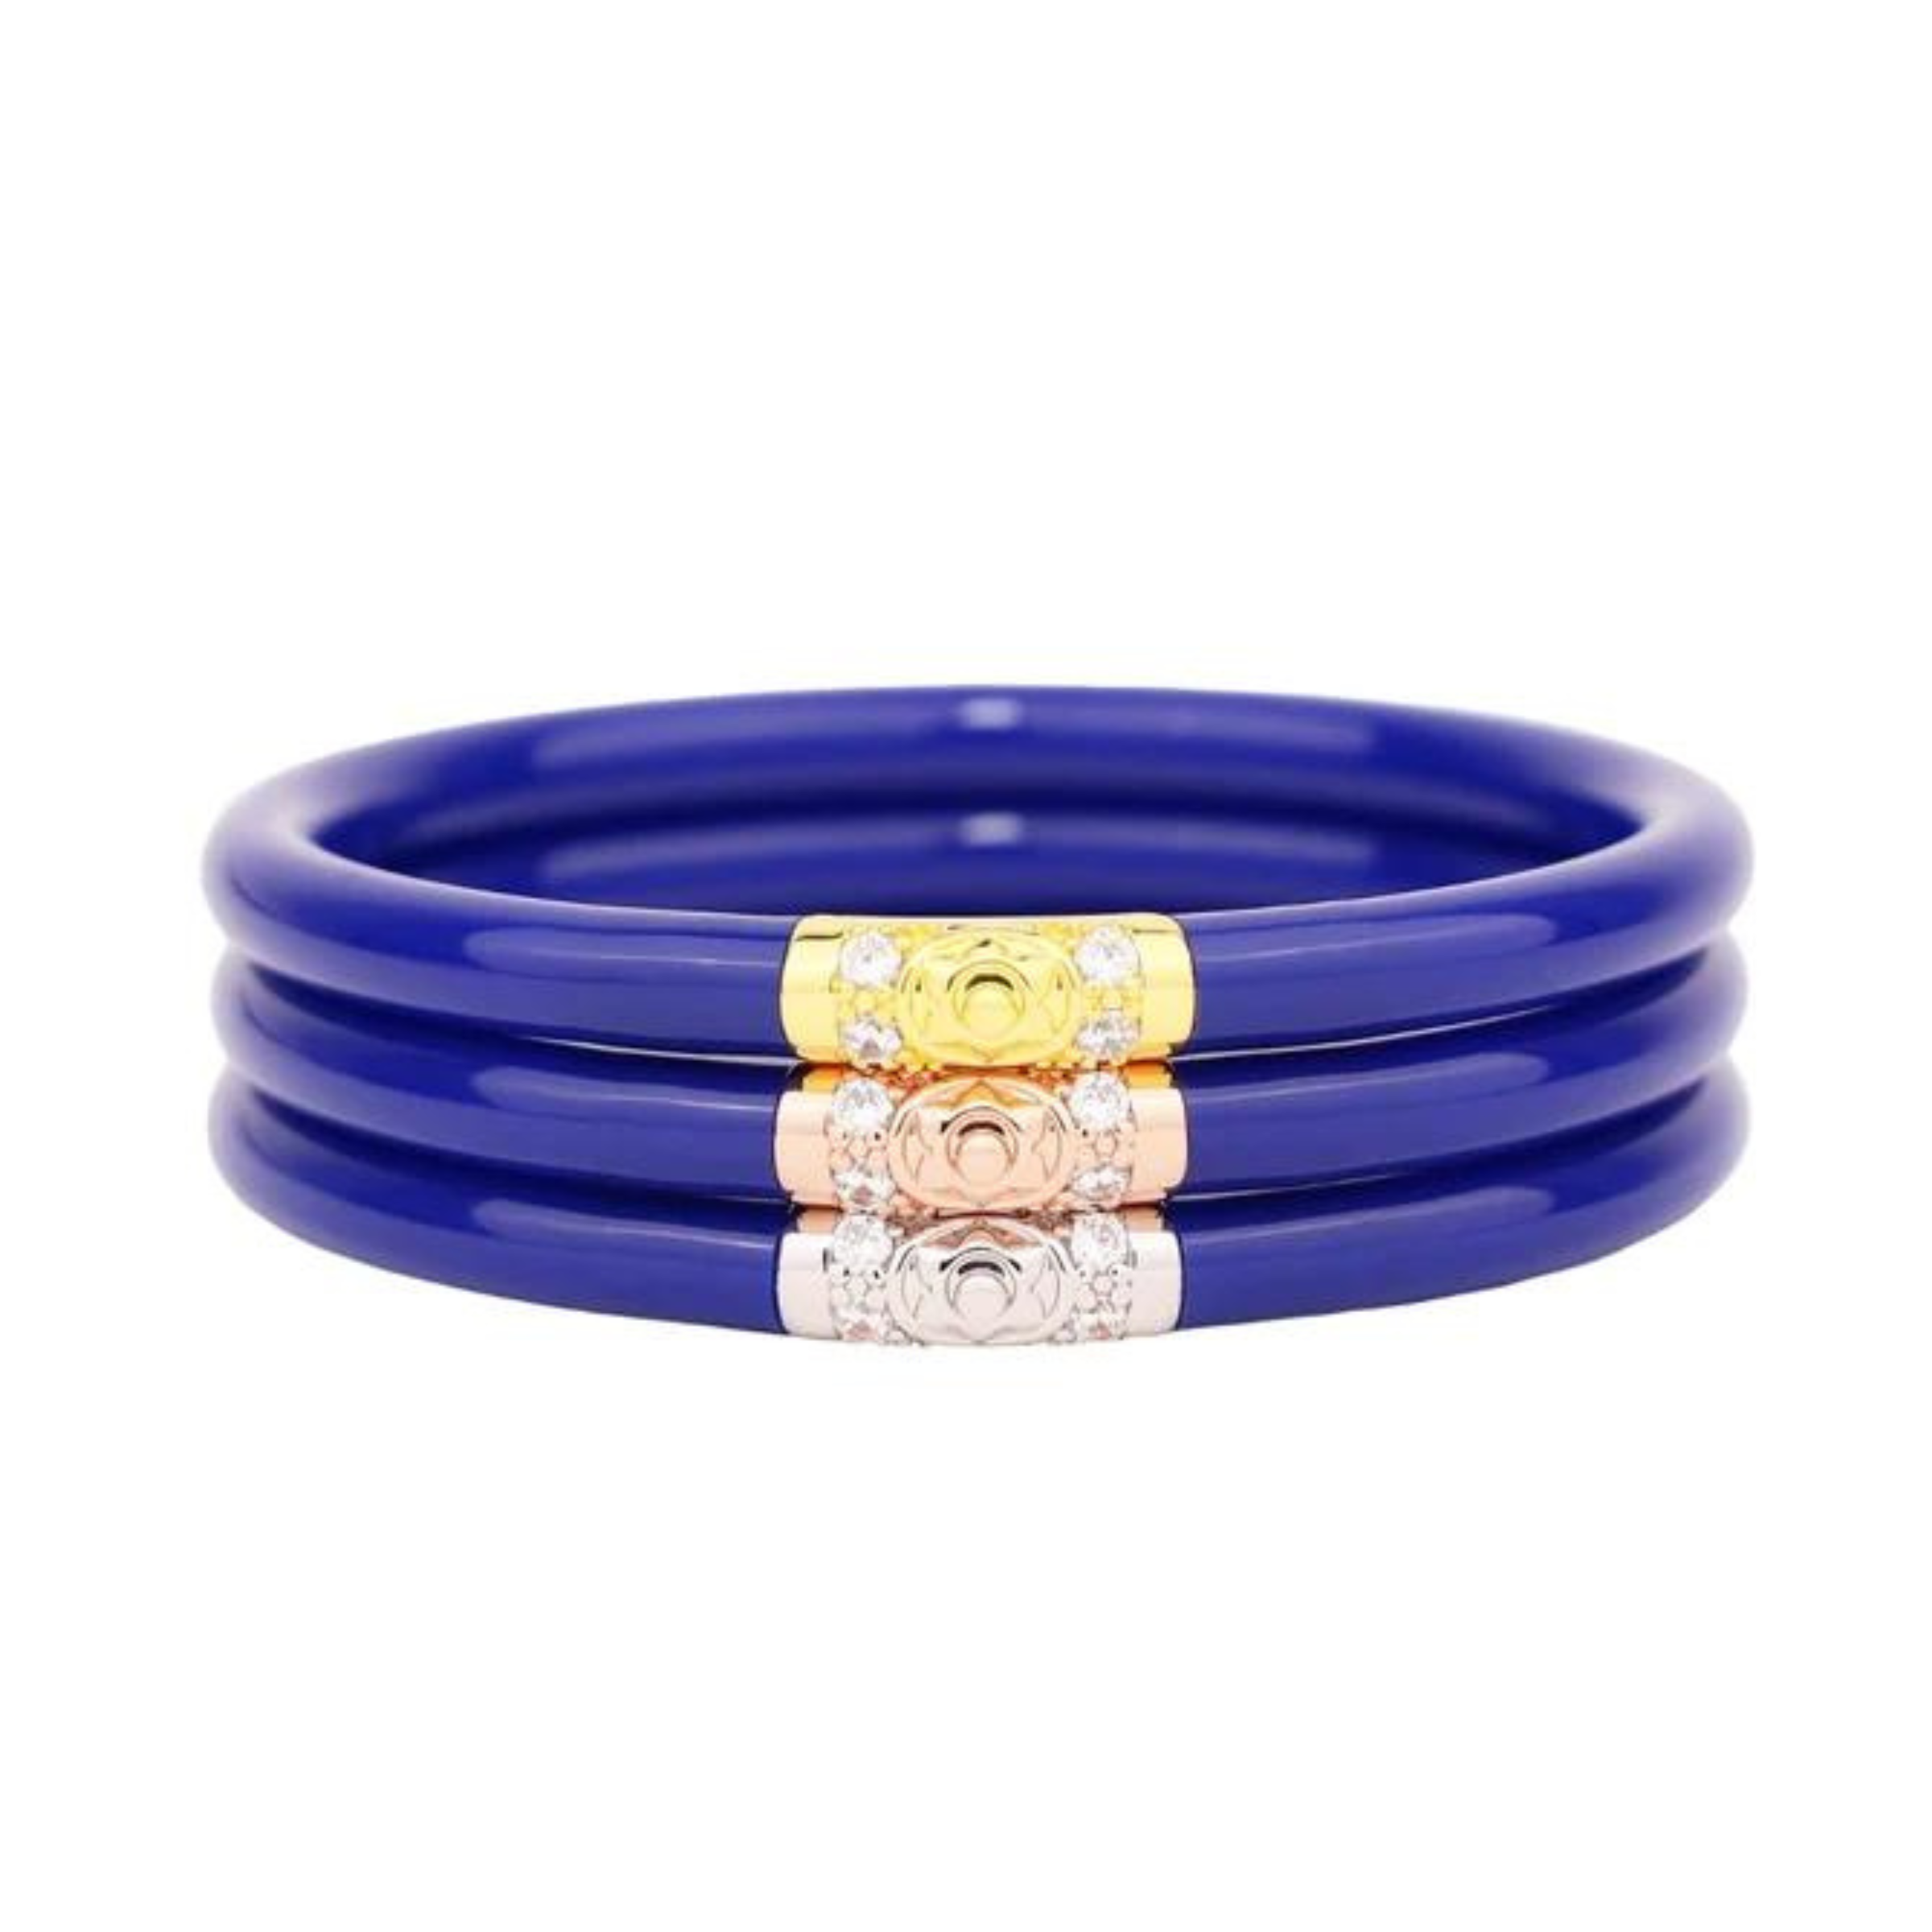 Pictured is a stack of three royal blue bangle bracelets on a white background. 